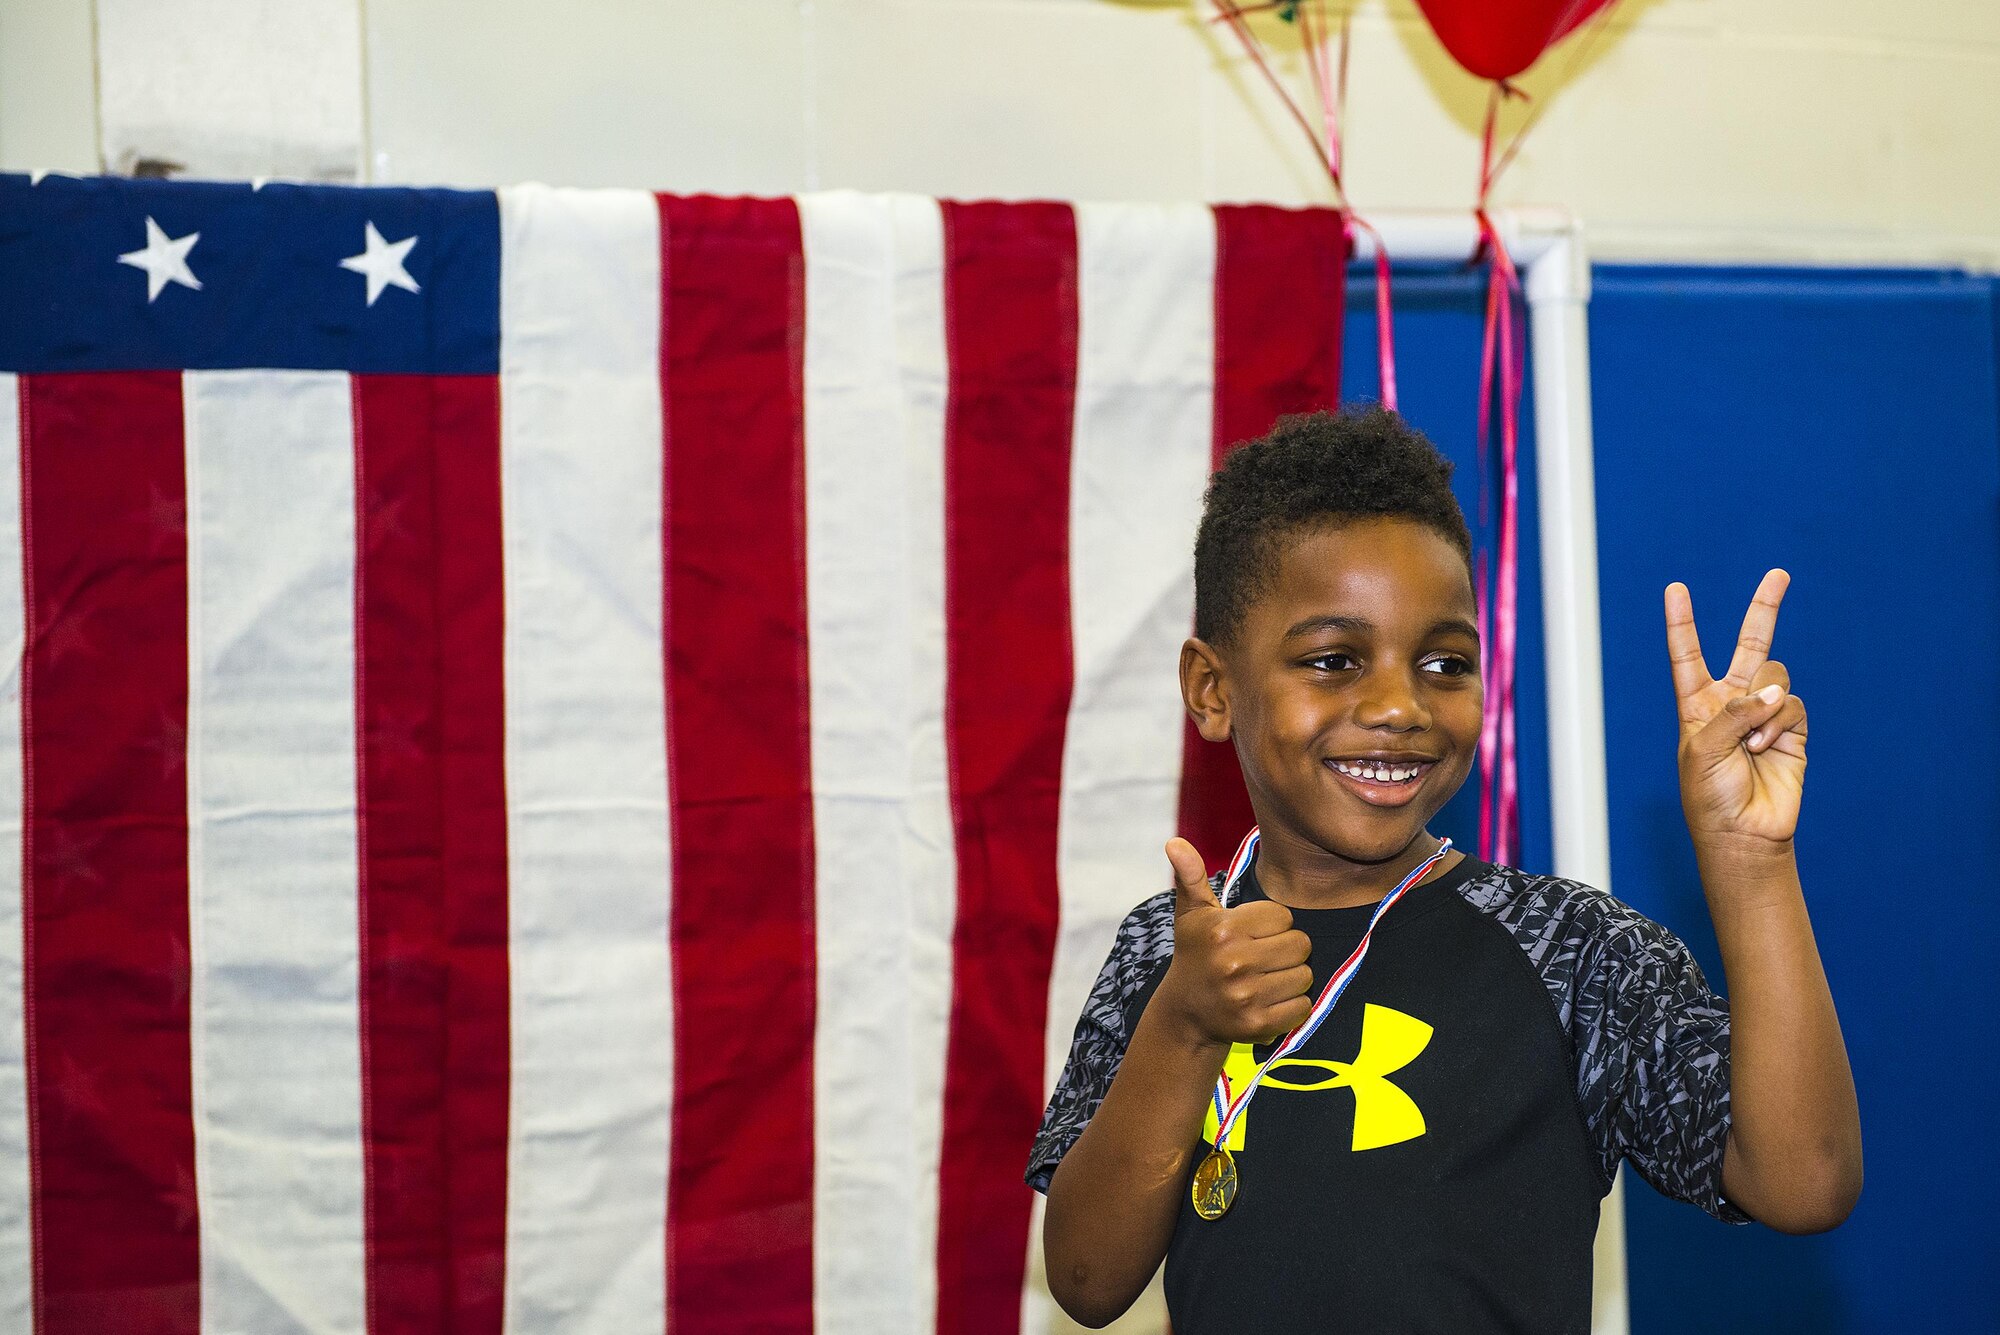 Morrecus, son of Master Sgt. Tiffany Jackson-Foster, 23d Logistics Readiness Squadron transportation management office superintendent, smiles after receiving a medal at the end of Olympic Day in the Youth Center during Olympic Week, June 15, 2017, at Moody Air Force Base, Ga. Every participant received a medal for taking part in the Youth Center’s annual Olympic Week, which was designed to promote unity and healthy lifestyles. (U.S. Air Force Photo by Airman 1st Class Erick Requadt)

